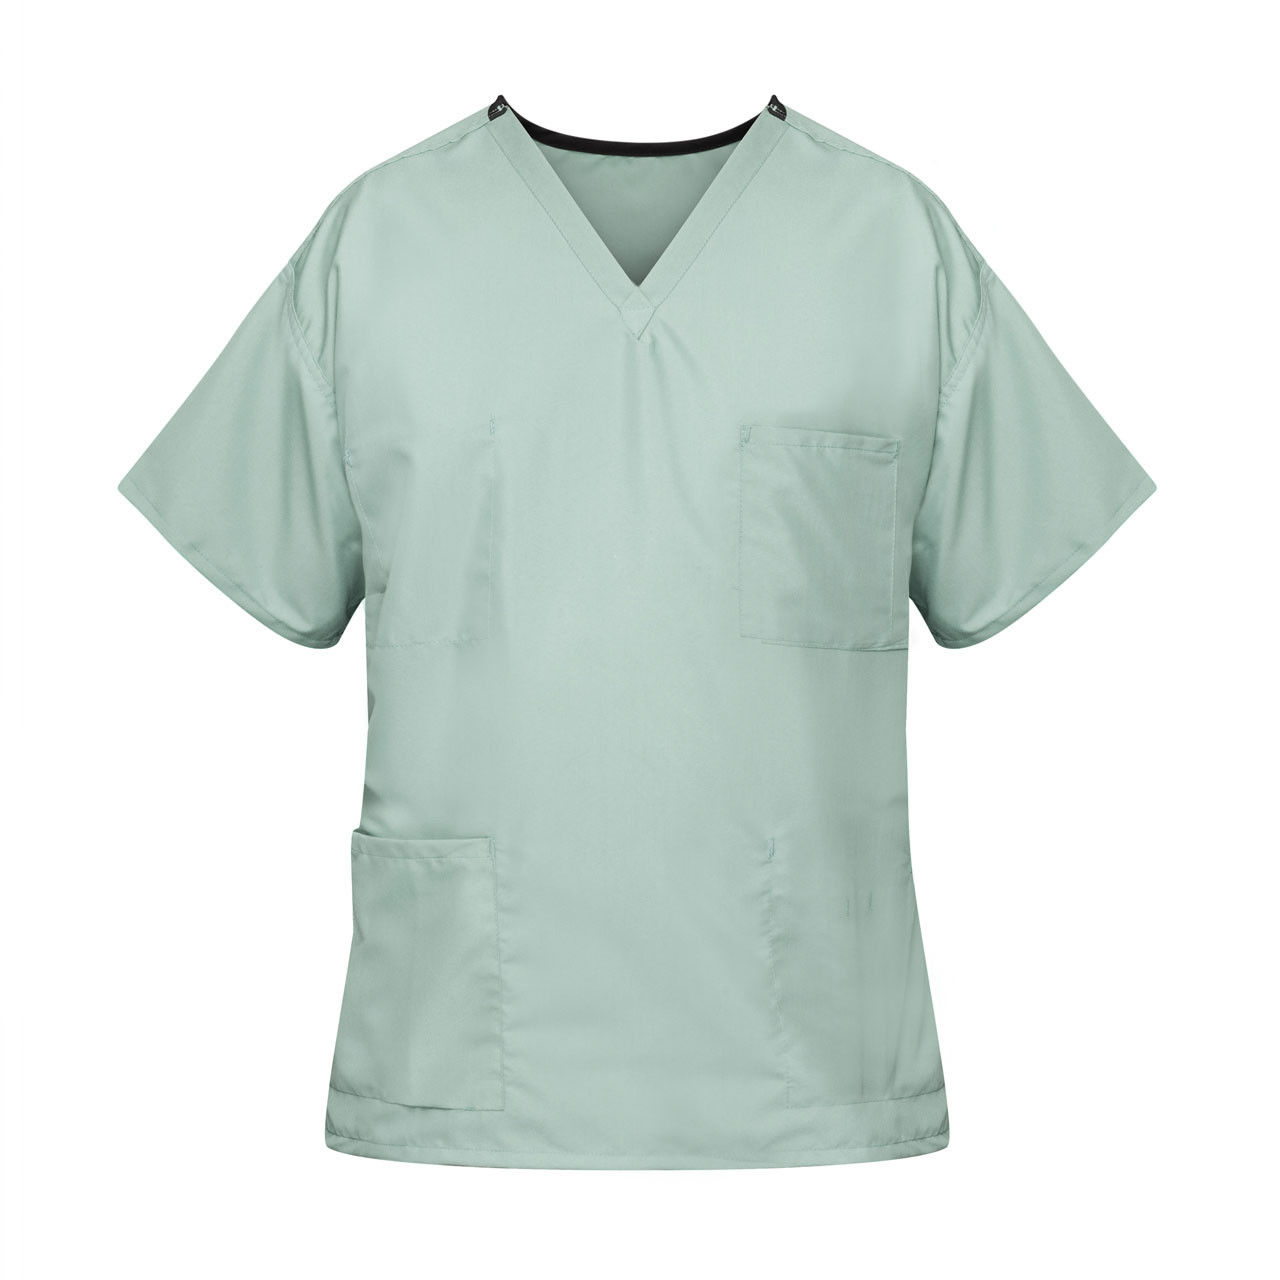 What is the color of the misty green scrubs?